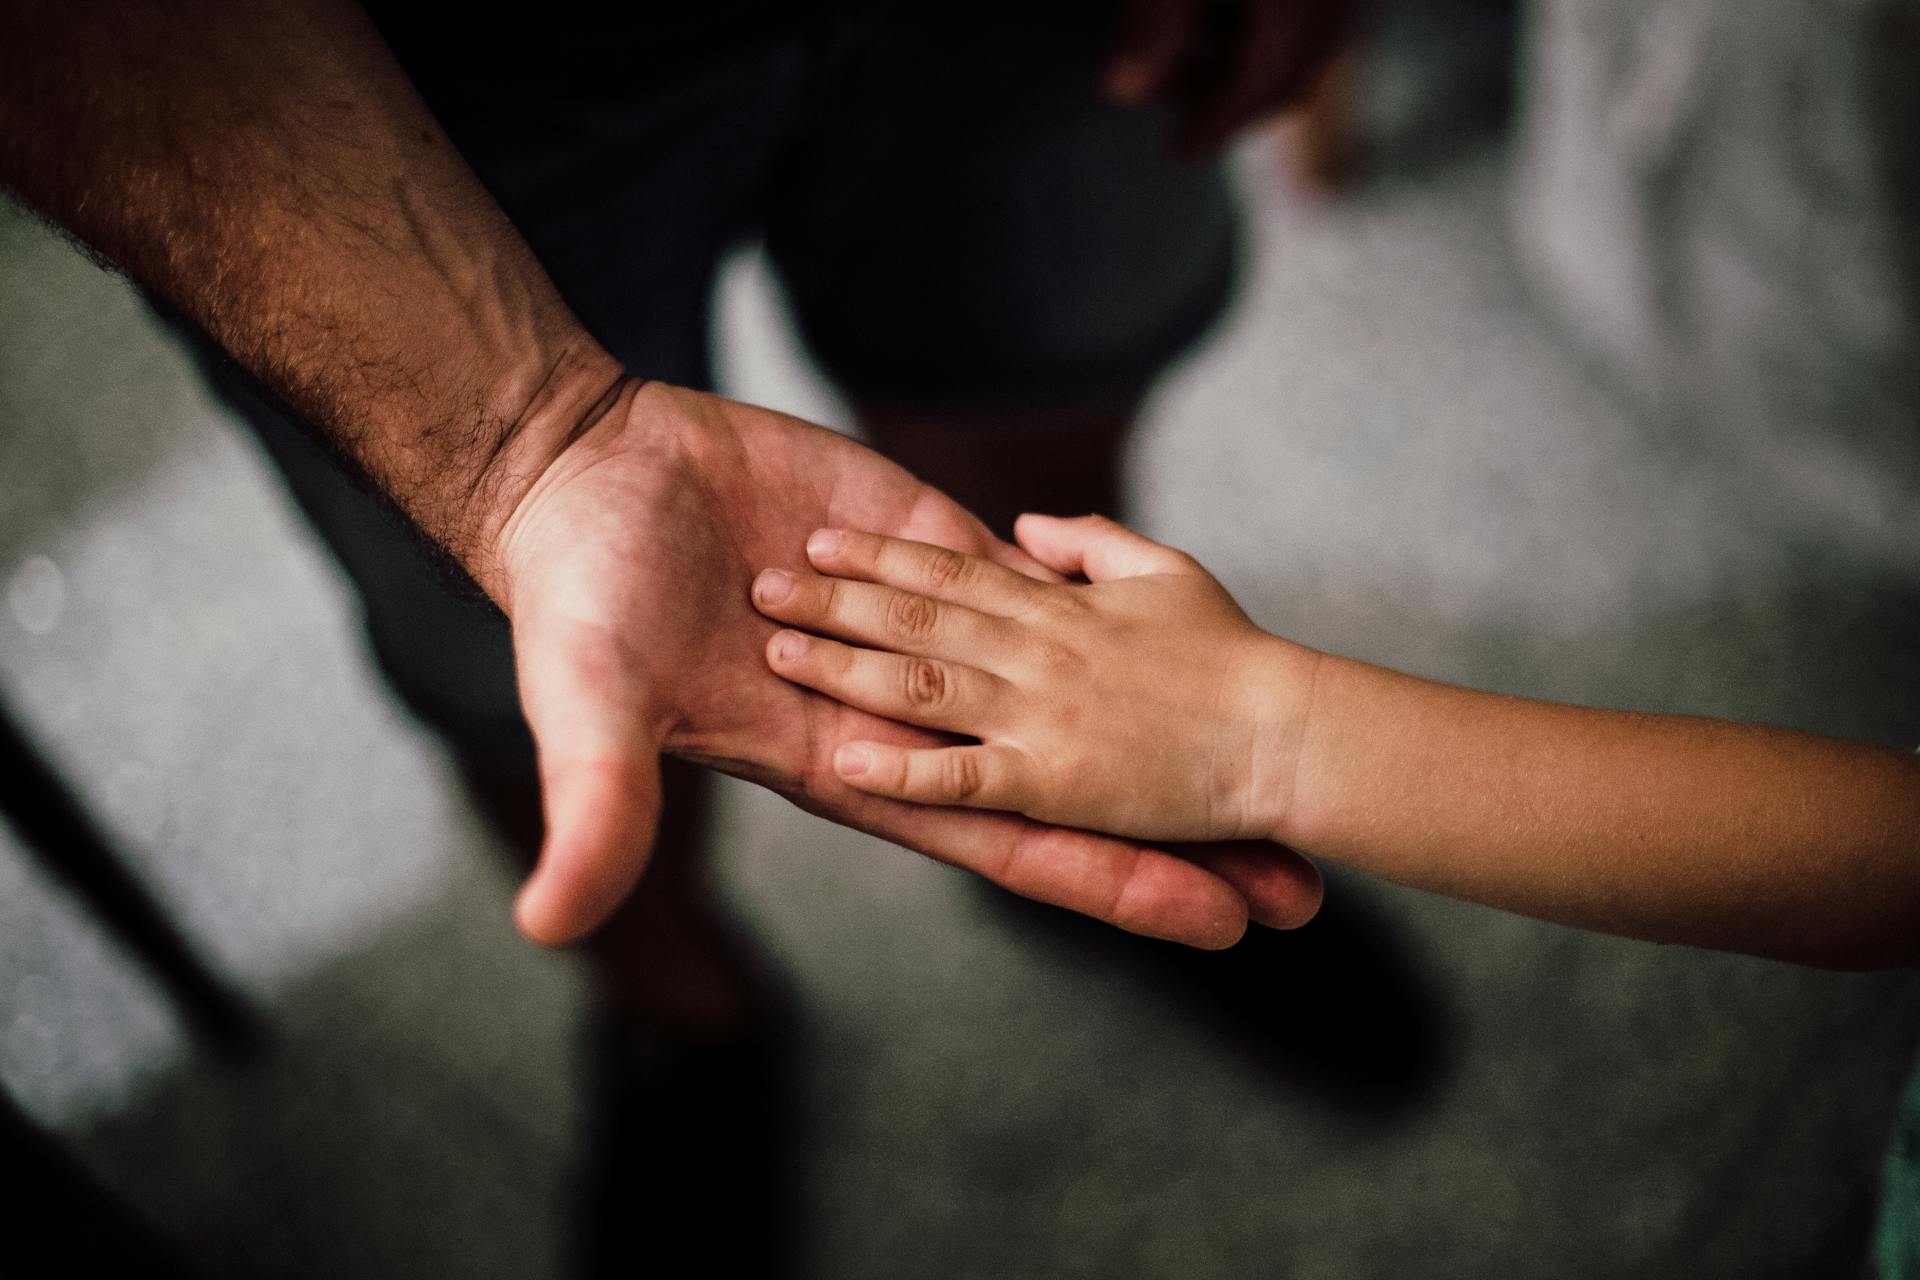 A child's hand resting on his father's hand | Source: Pexels